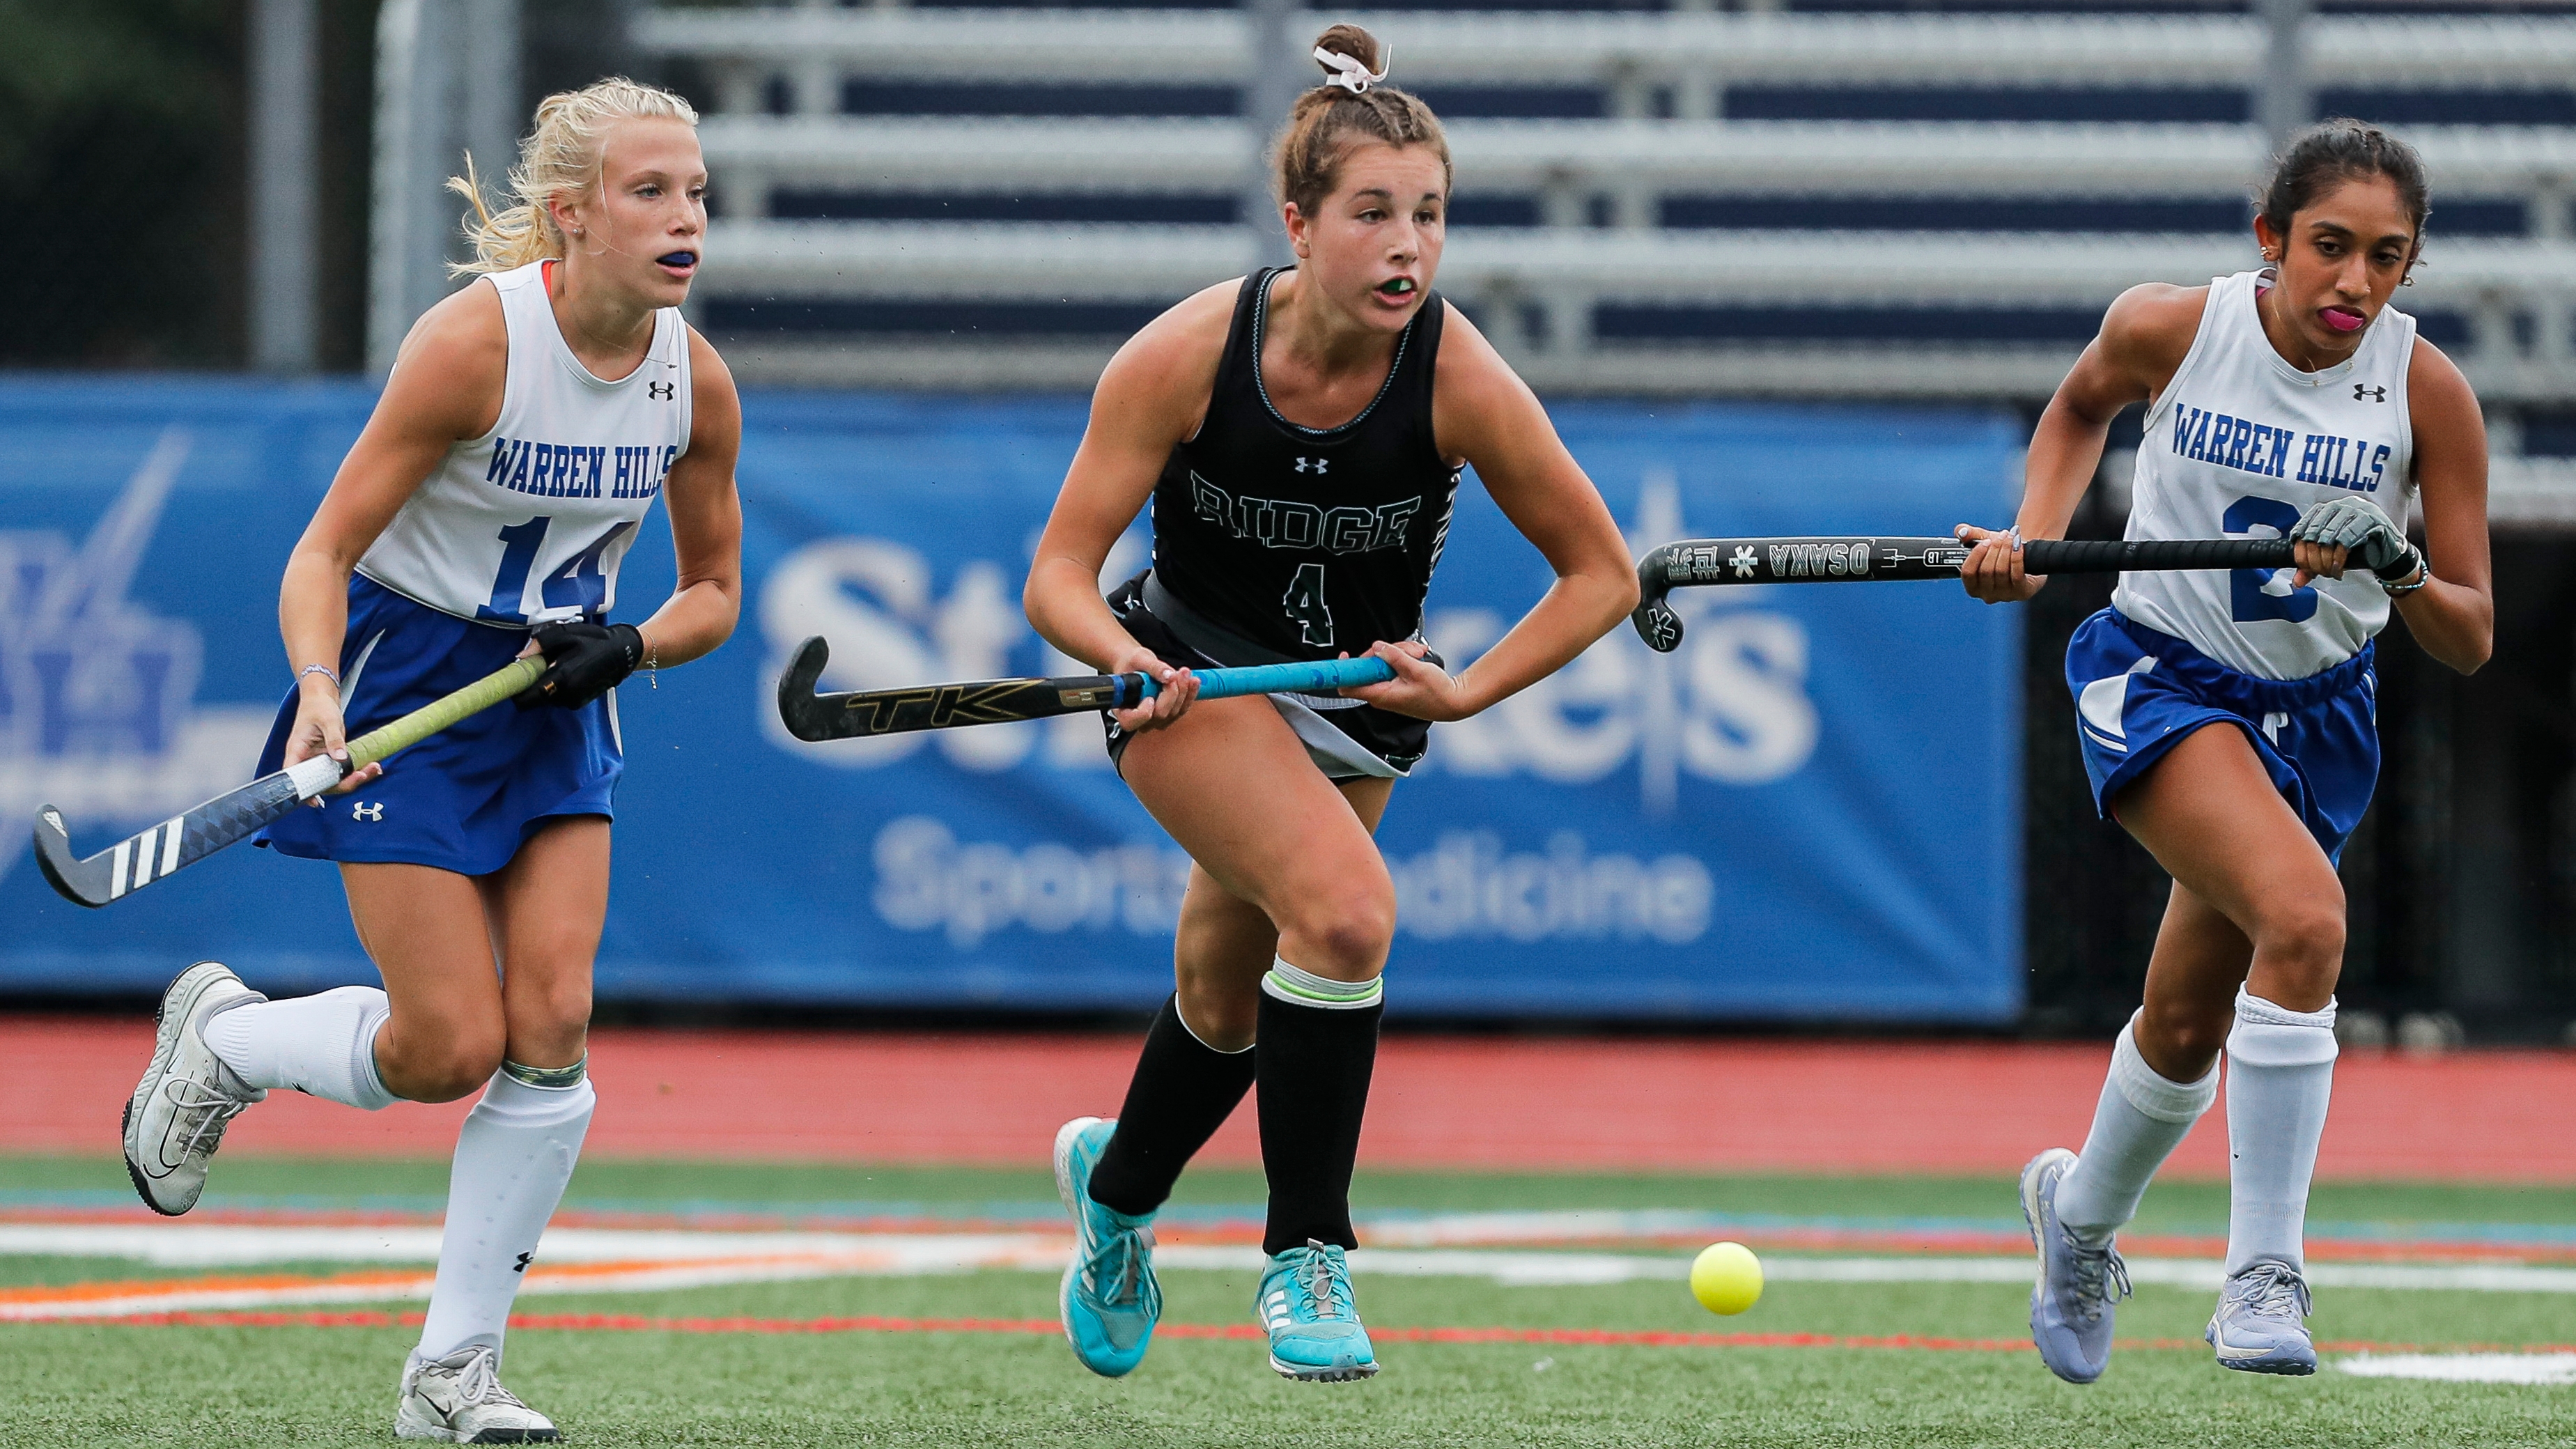 Top 100 juniors in N.J. field hockey - Our picks, your votes 